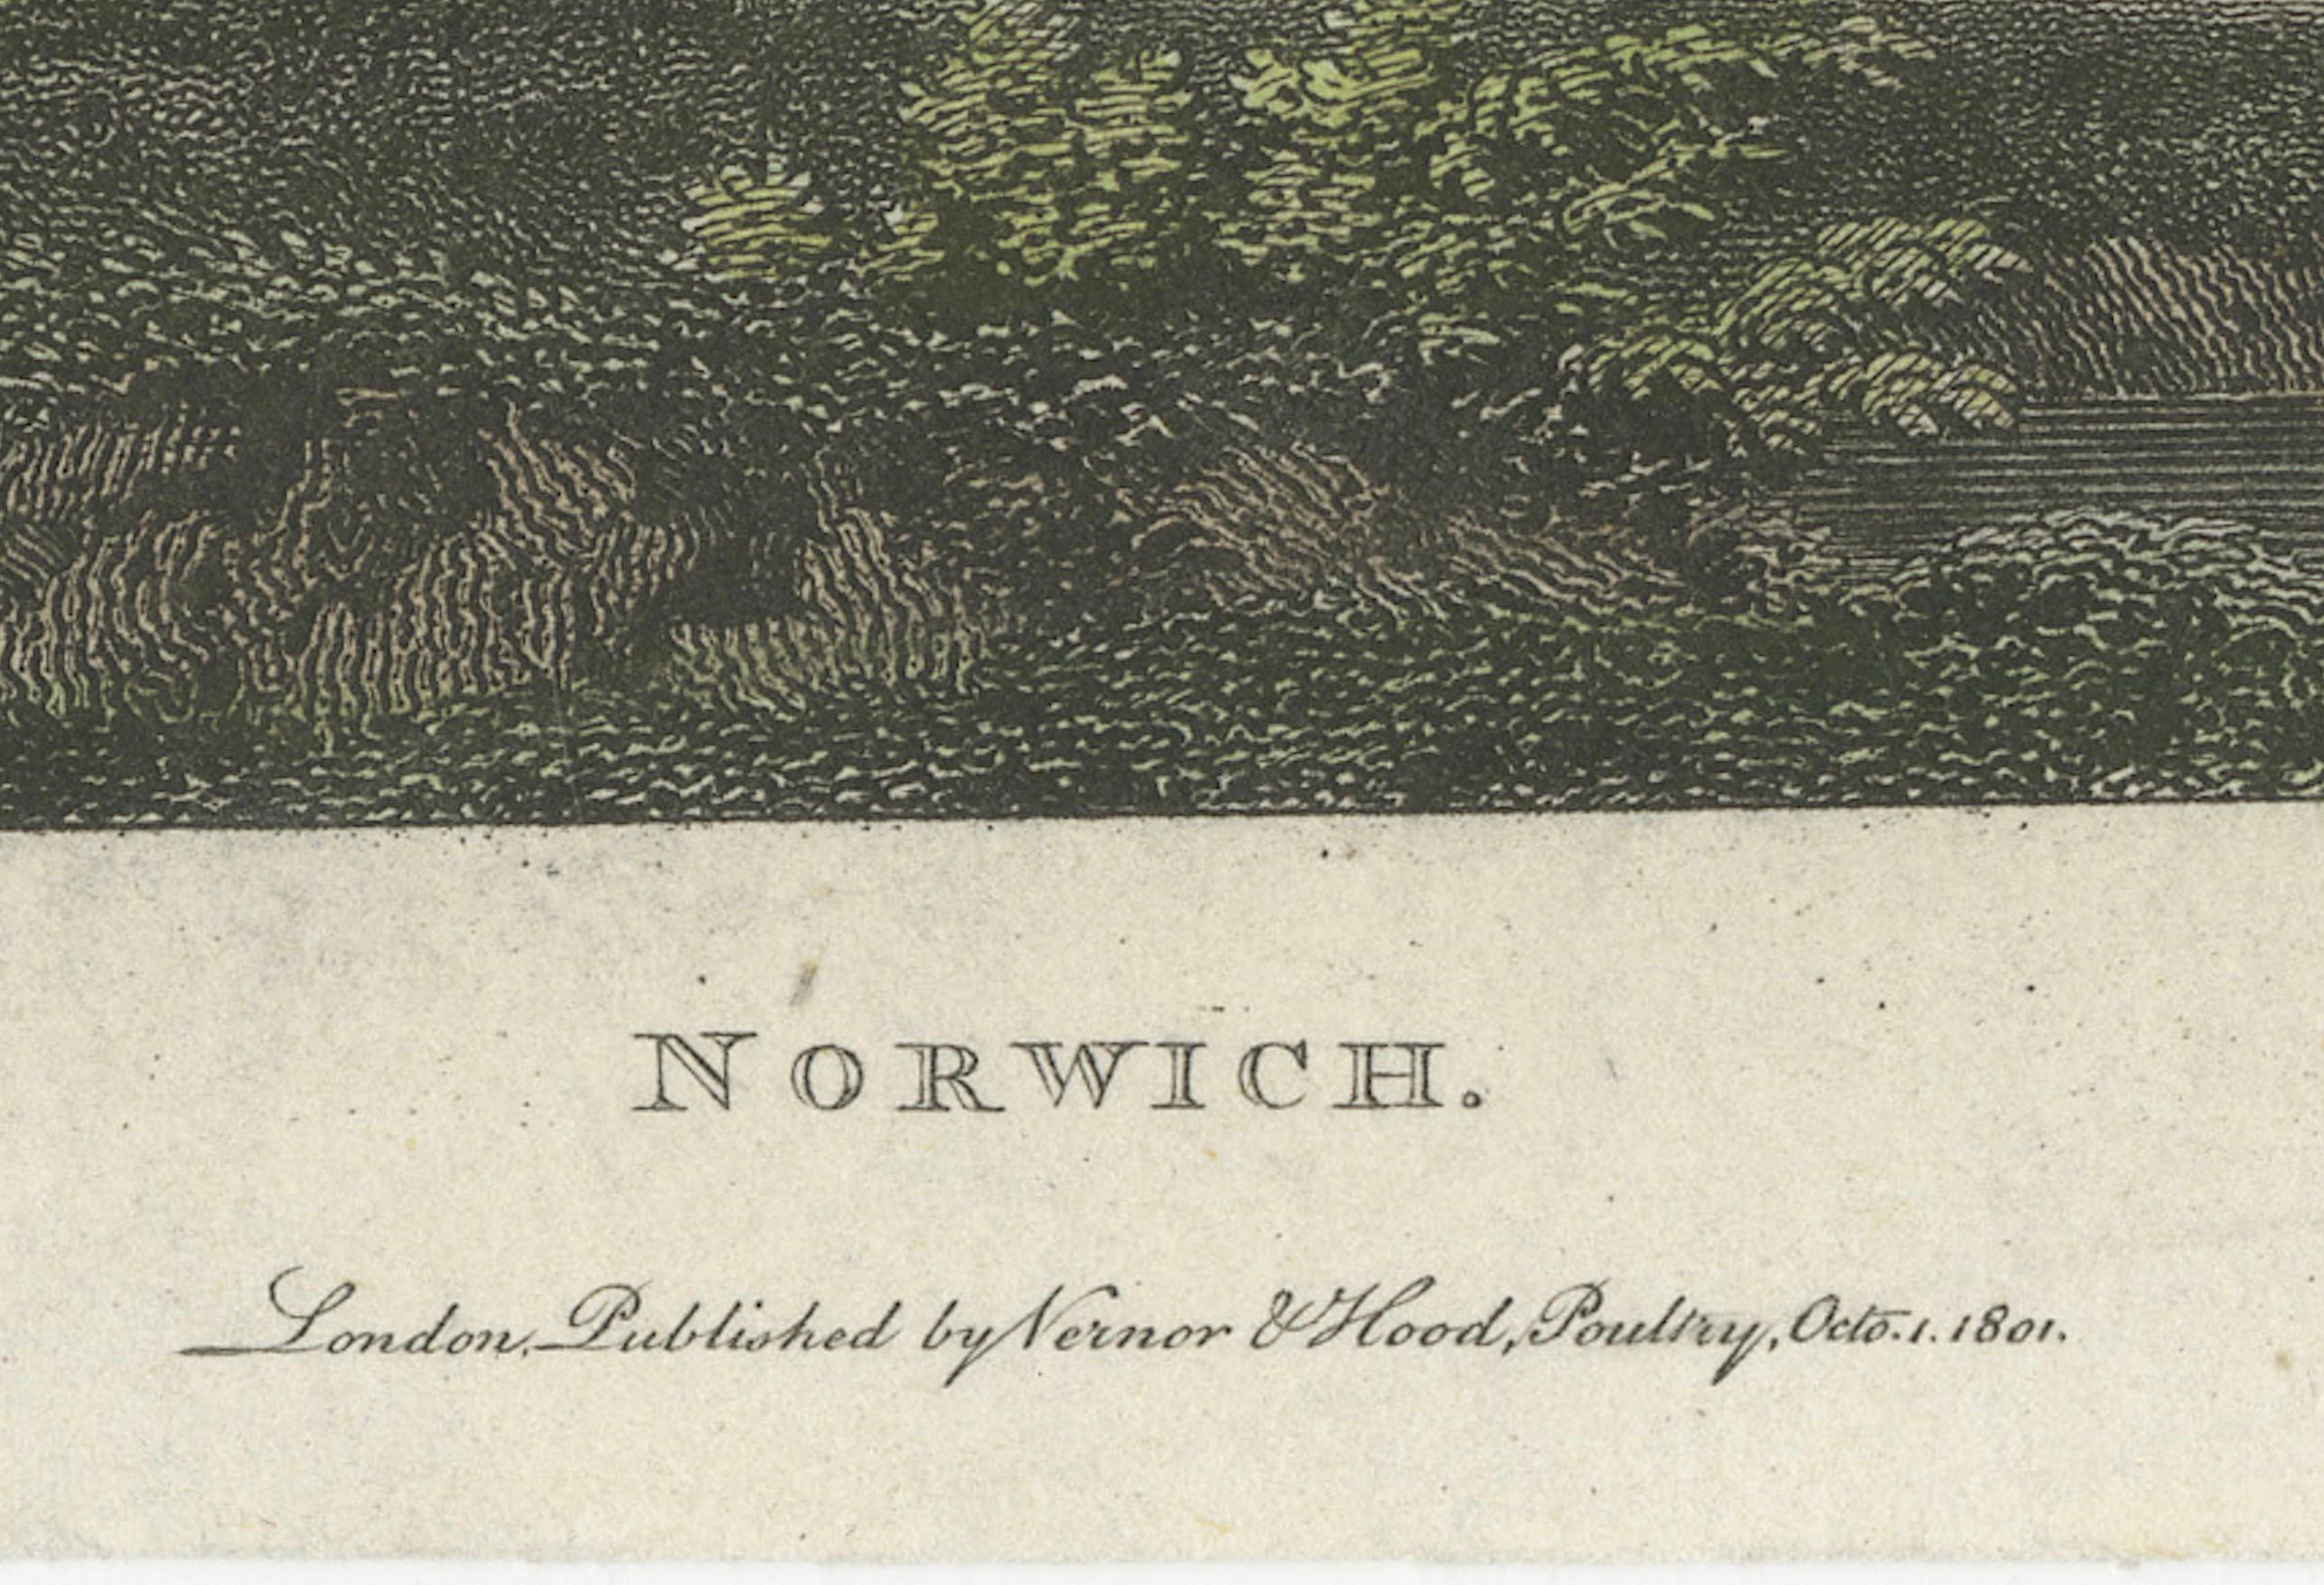 Paper Enchanting Norwich: A Historical 1801 Engraved View by W. Angus and E. Dayes For Sale